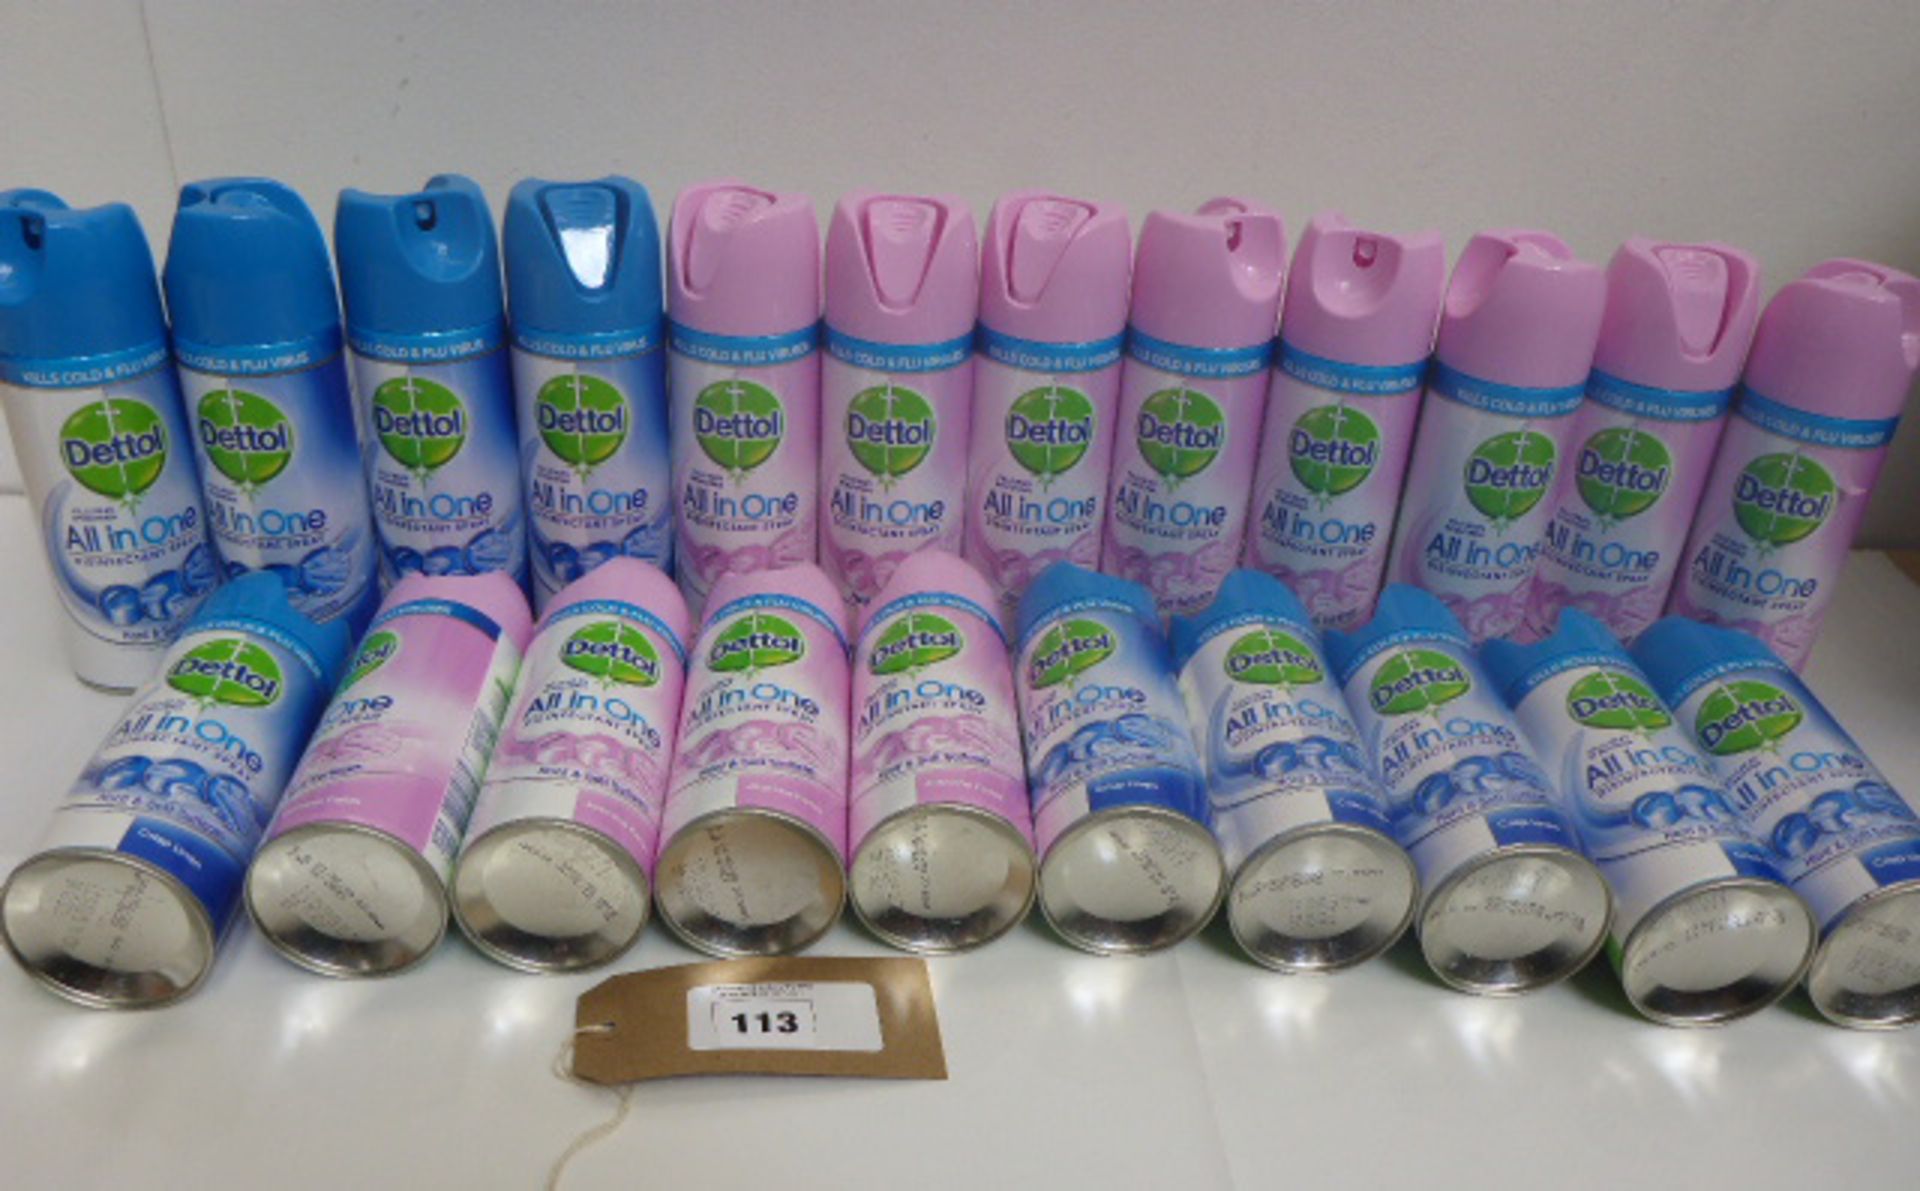 Bag containing 20 cans of Dettol All In One disinfectant sprays